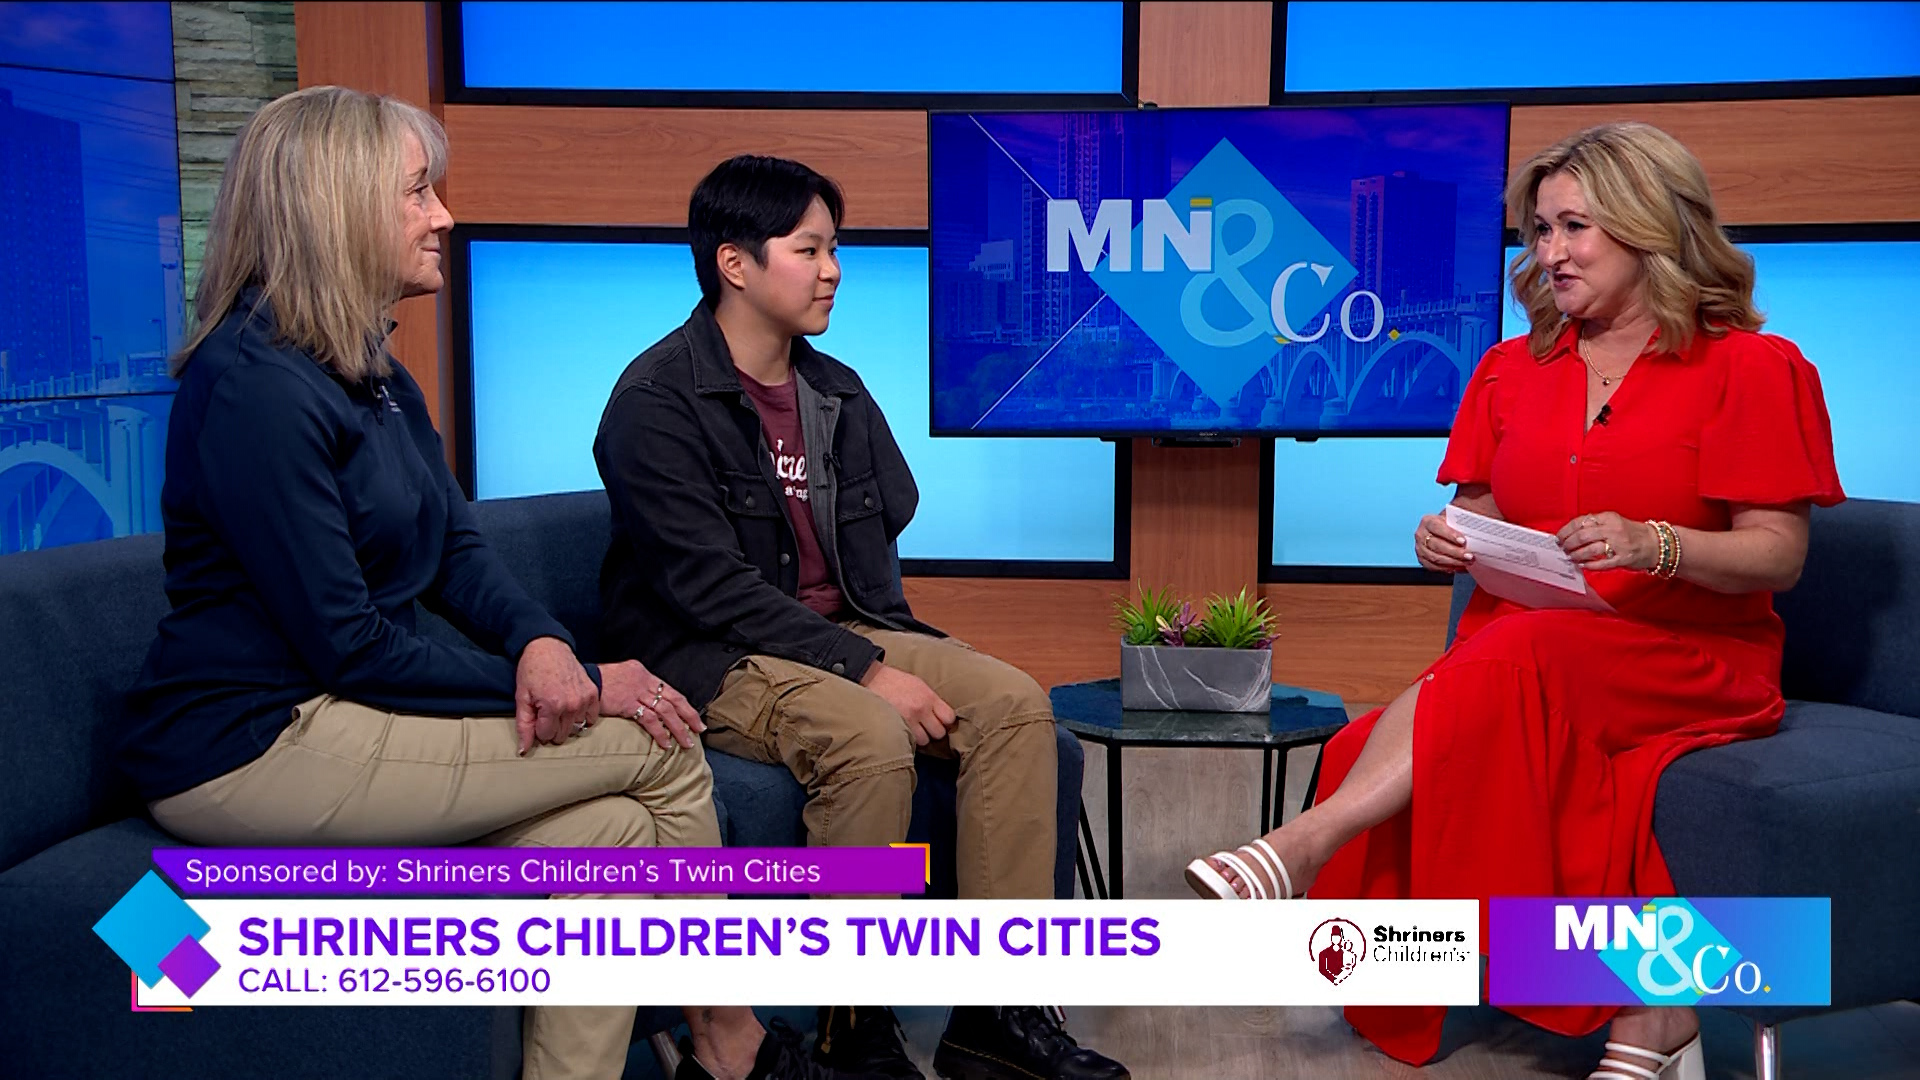 Shriners Children's Twin Cities join Minnesota and Company to discuss how they are changing the lives and care of the children who enters their facilities.